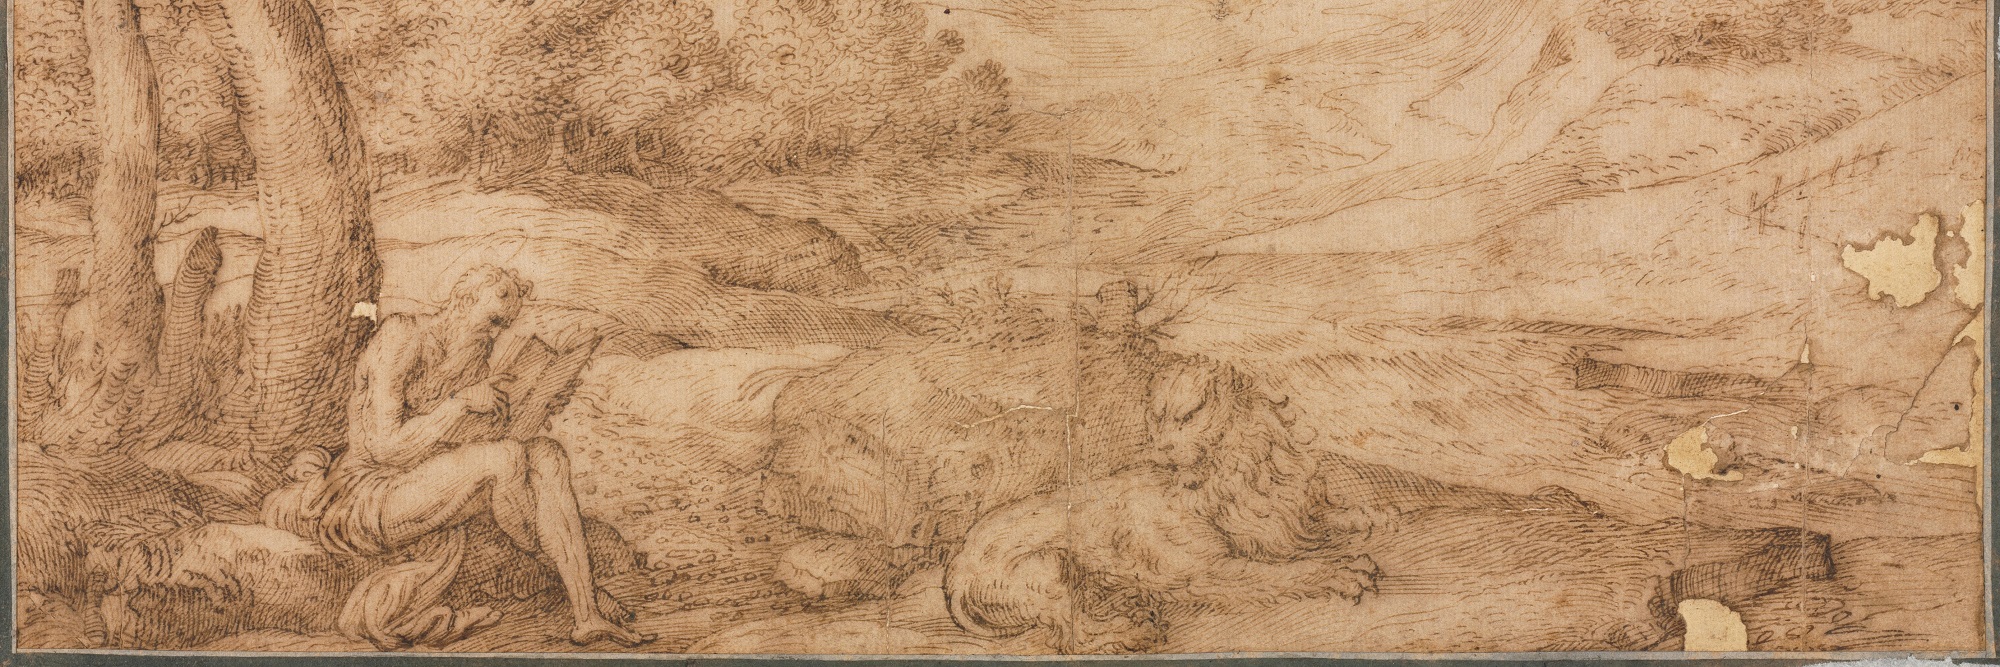 Campagnola, Domenico. Saint Jerome in a Landscape. 1530. Pen and brown ink. The Cleveland Museum of Art, The Charles W. Harkness Endowment Fund.